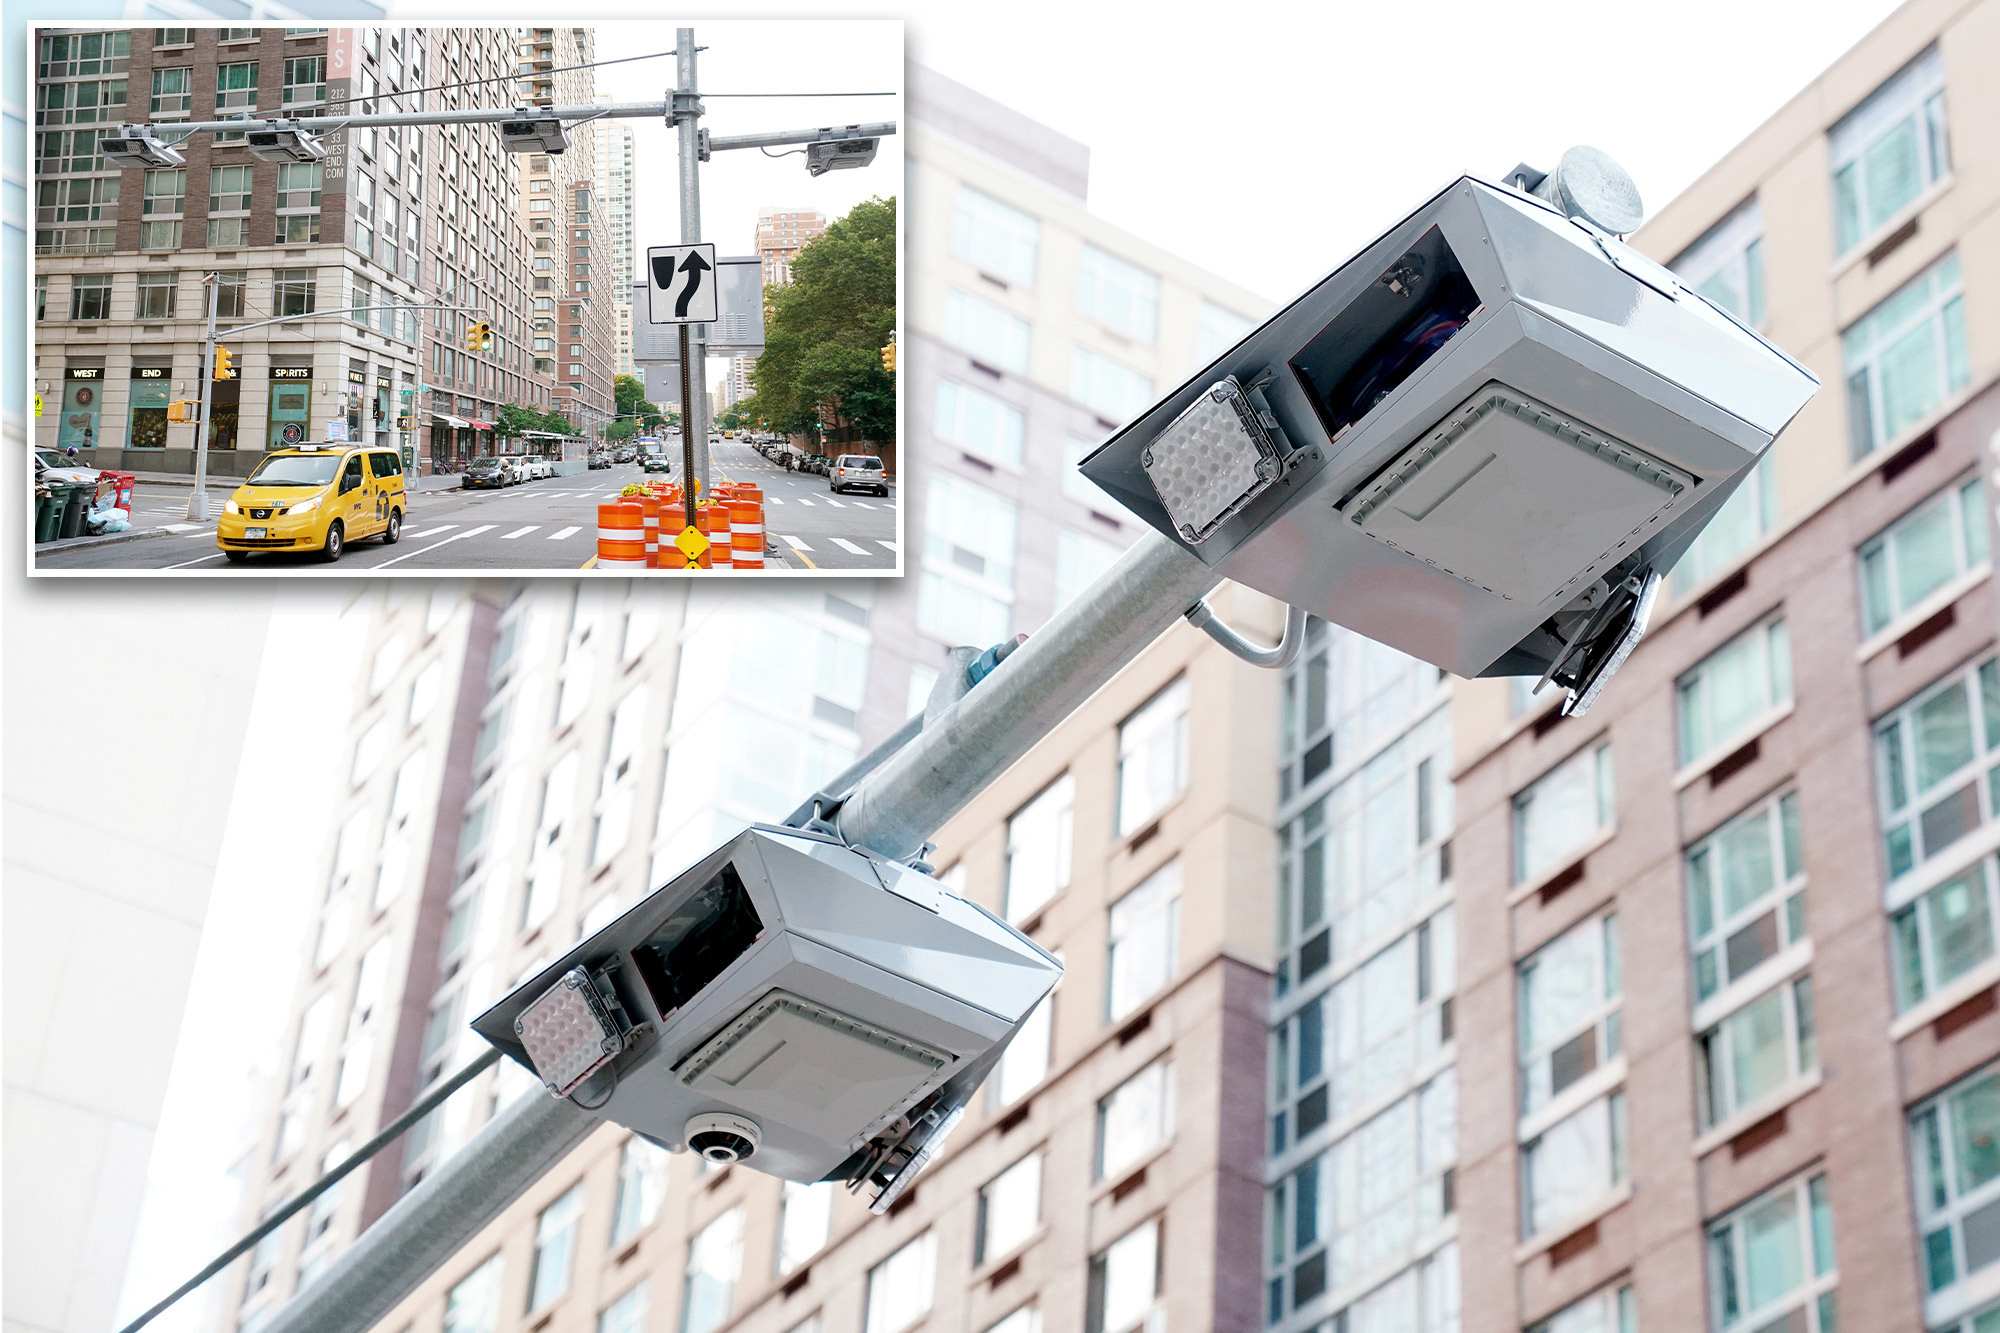 NYC congestion scanners installed as NJ files lawsuit over ‘toll shopping’